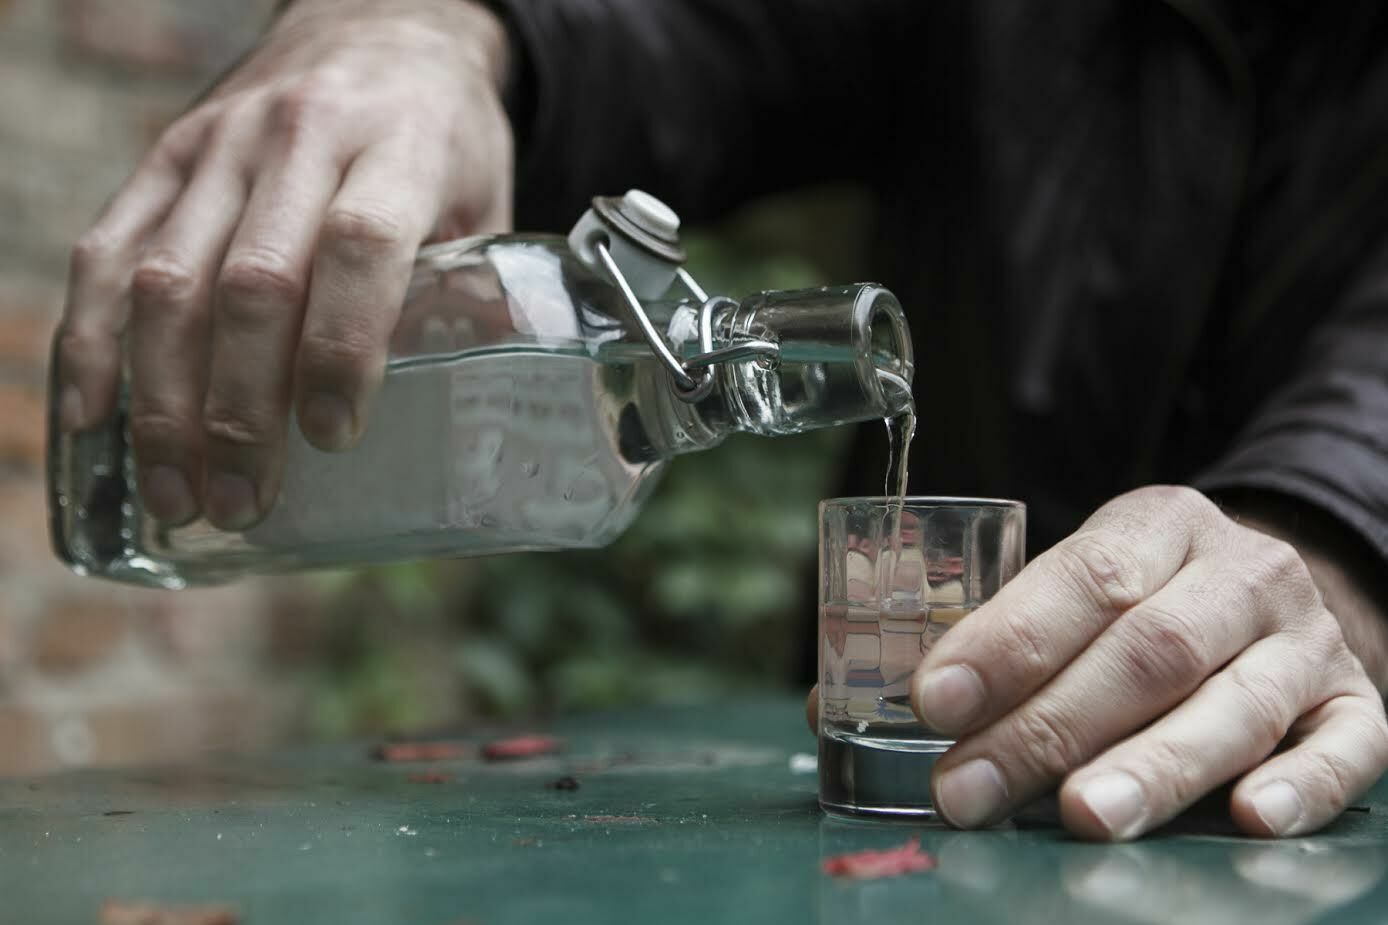 The number of deaths from alcohol poisoning in the Orenburg region increased to 14